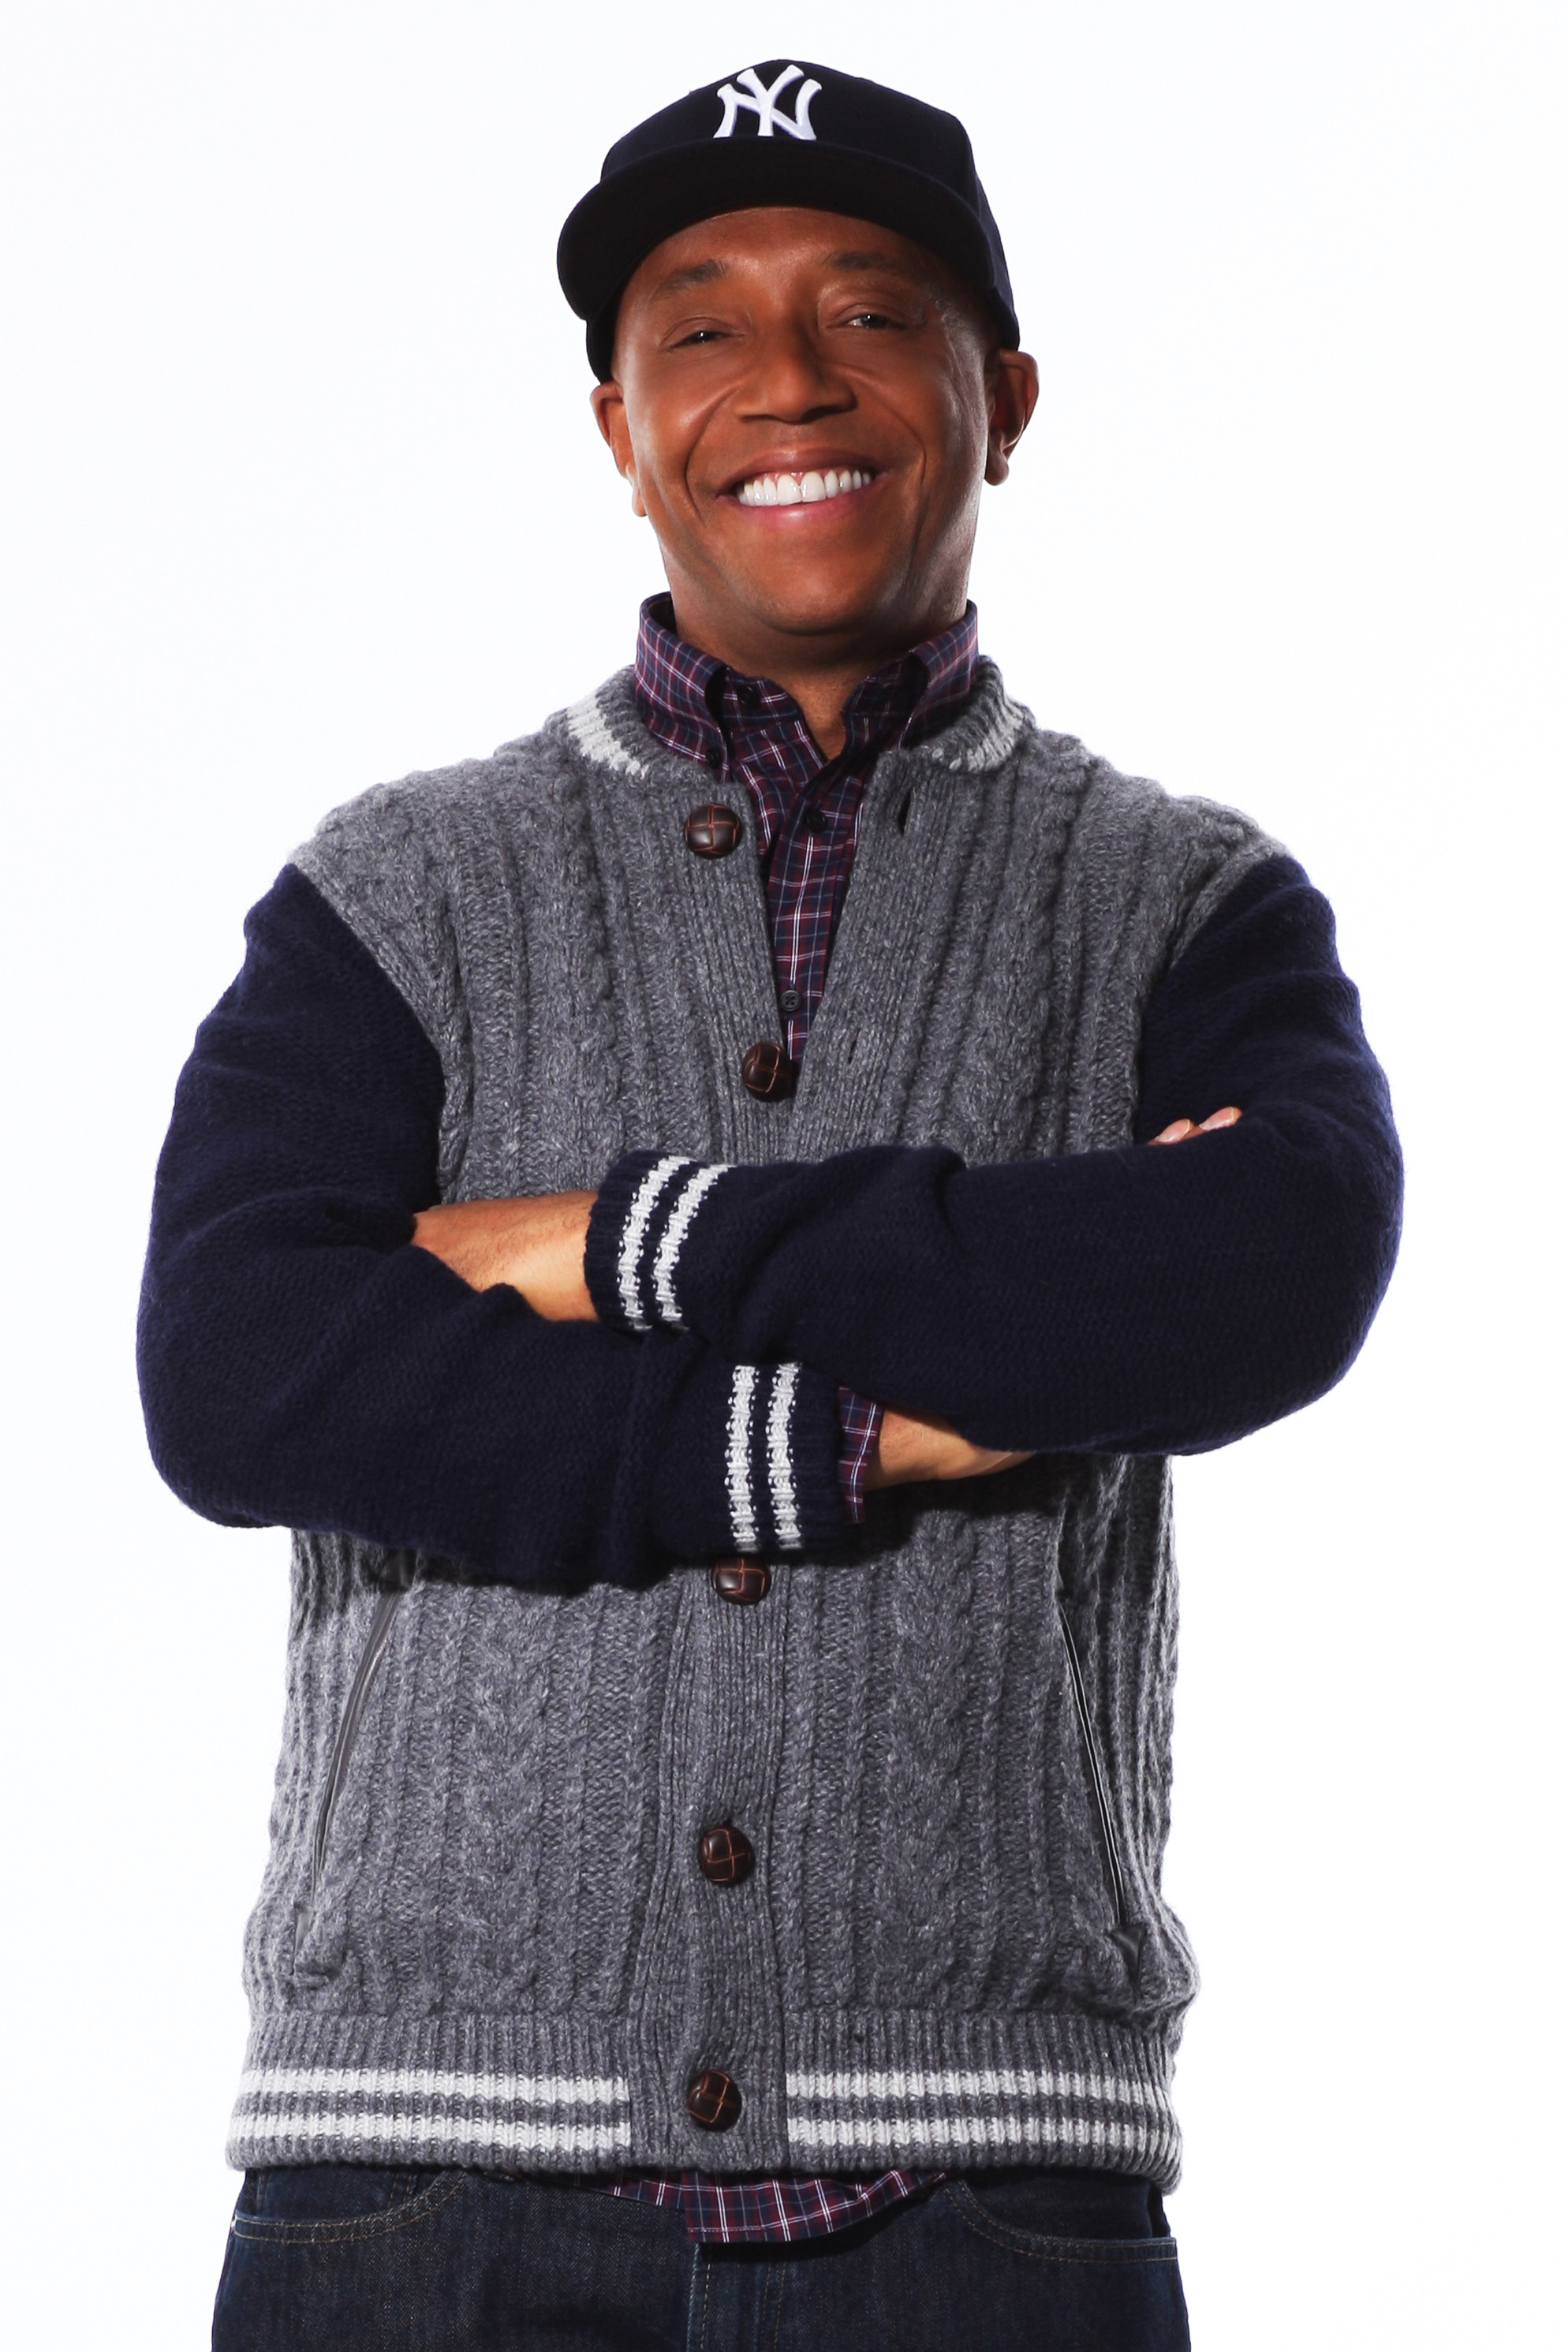 russell simmons